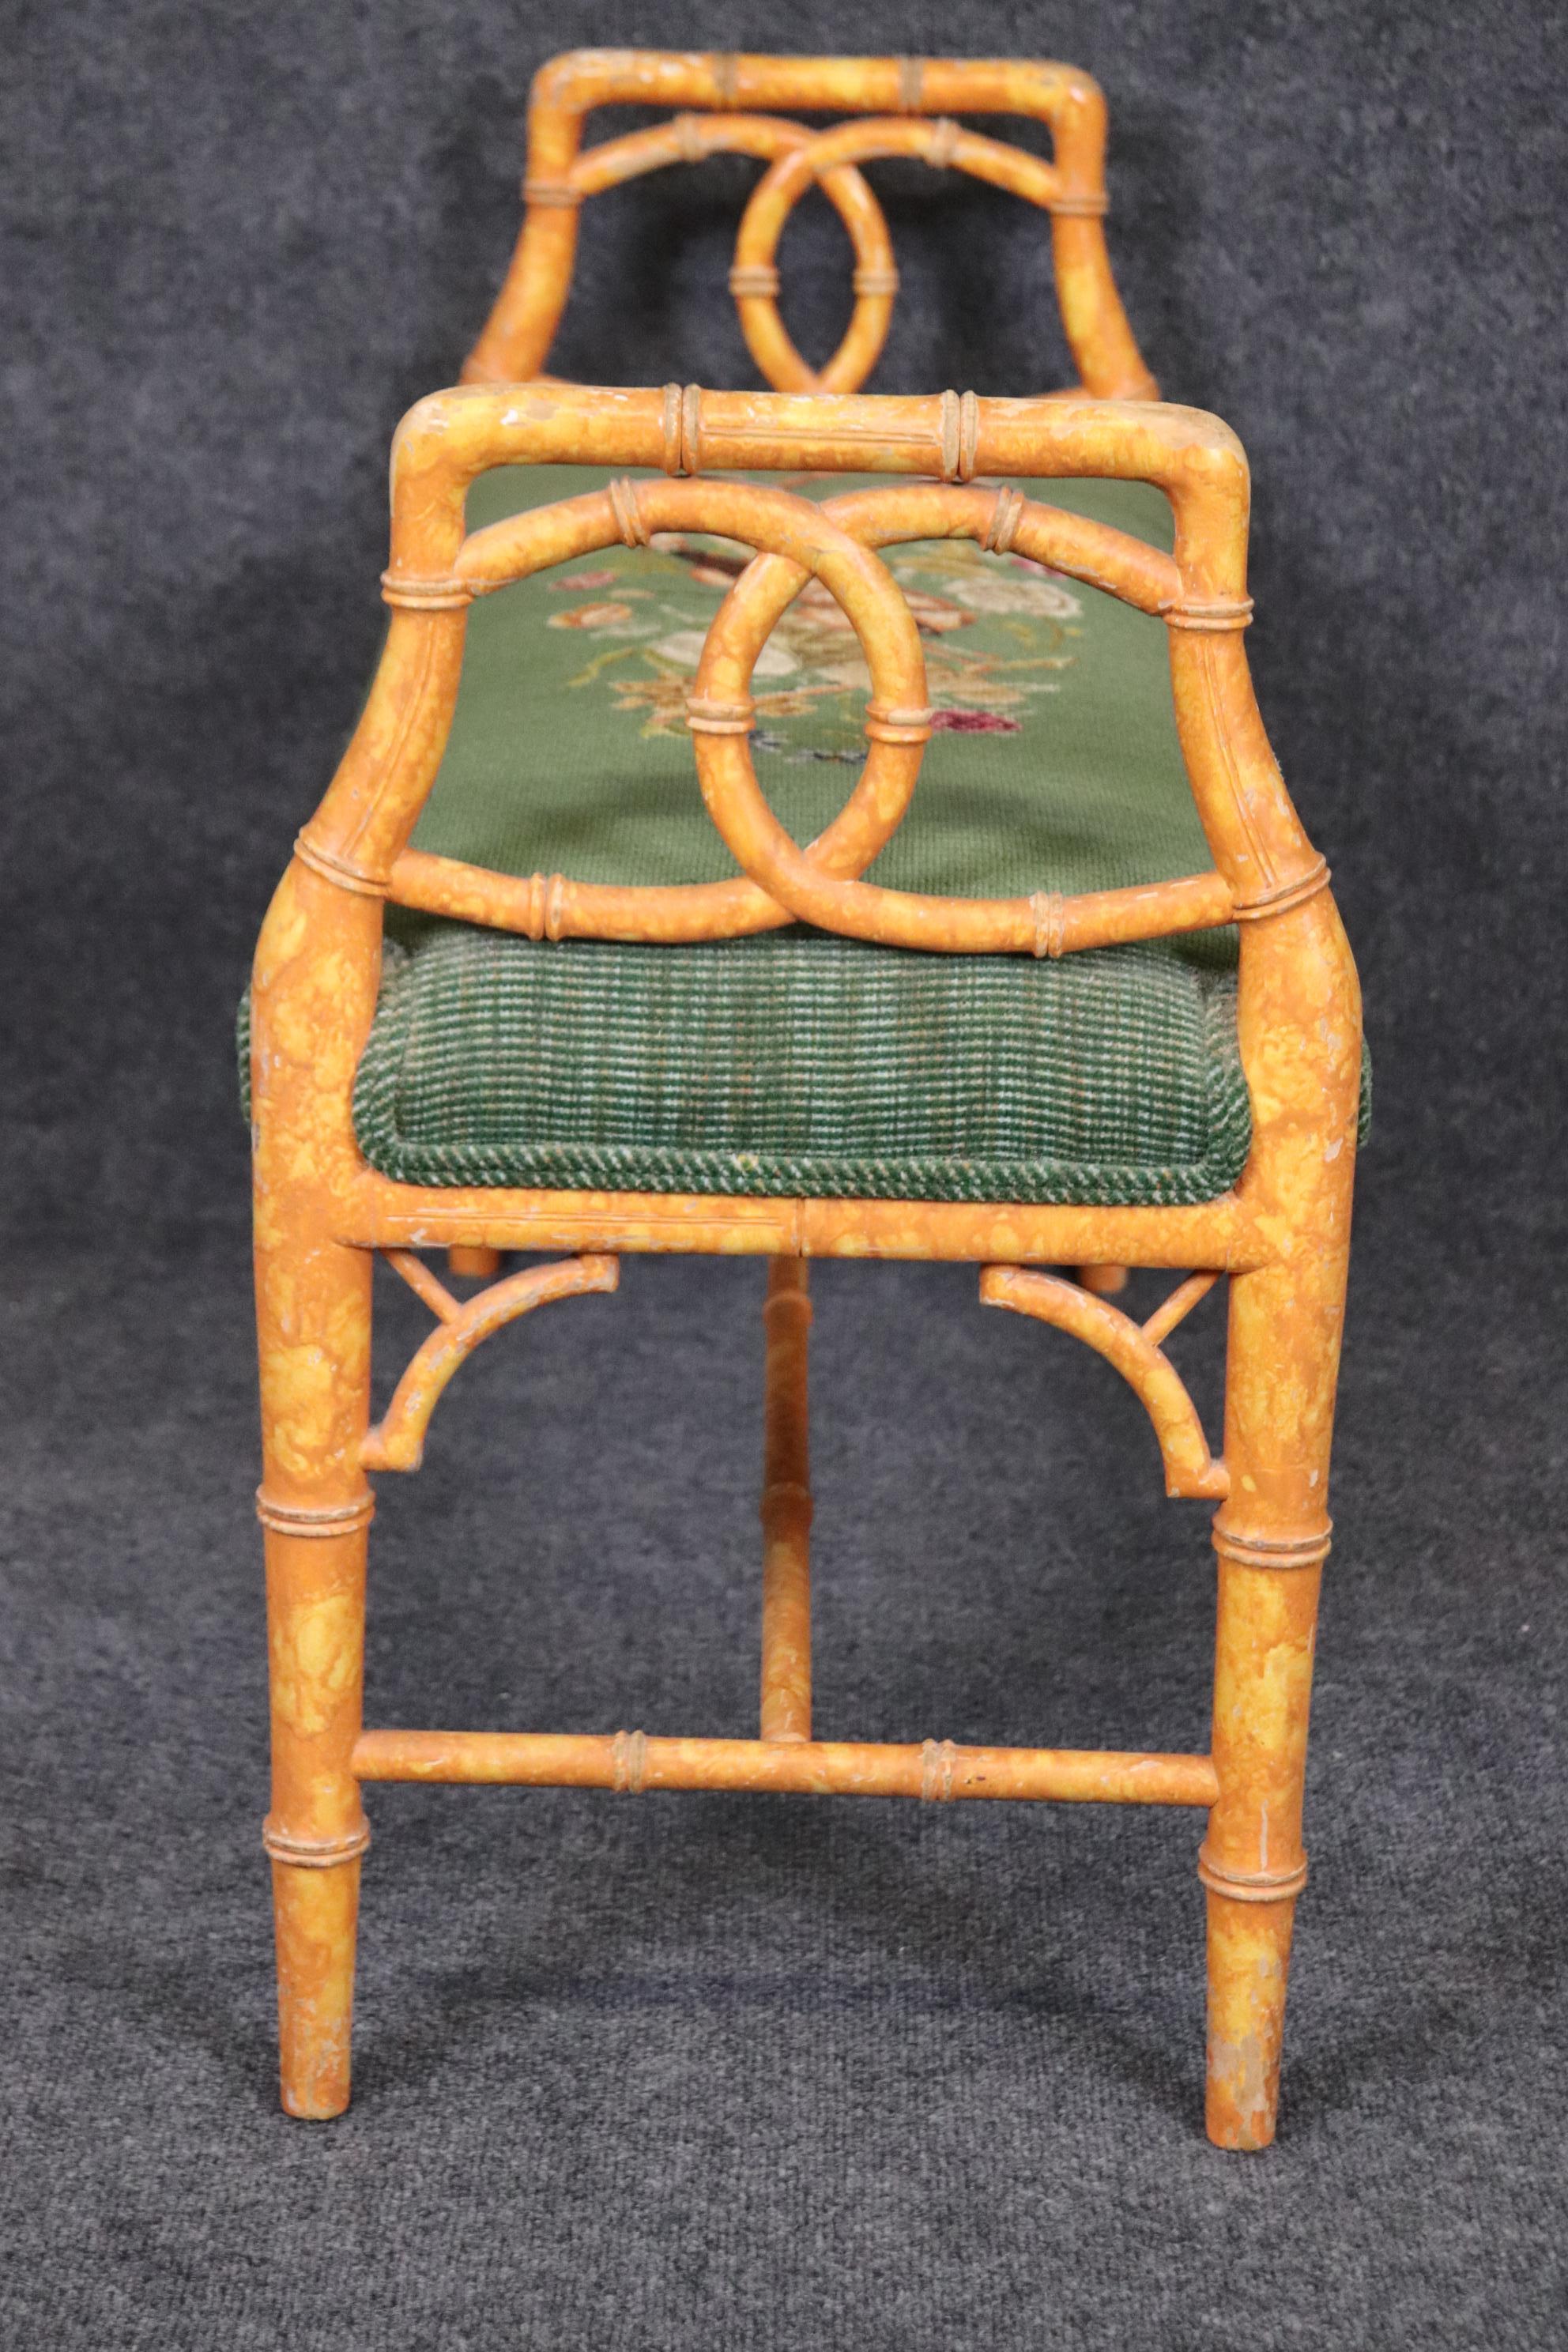 Faux Bamboo Paint Decorated Window Bench Stool with Needlepoint Upholstery In Good Condition For Sale In Swedesboro, NJ